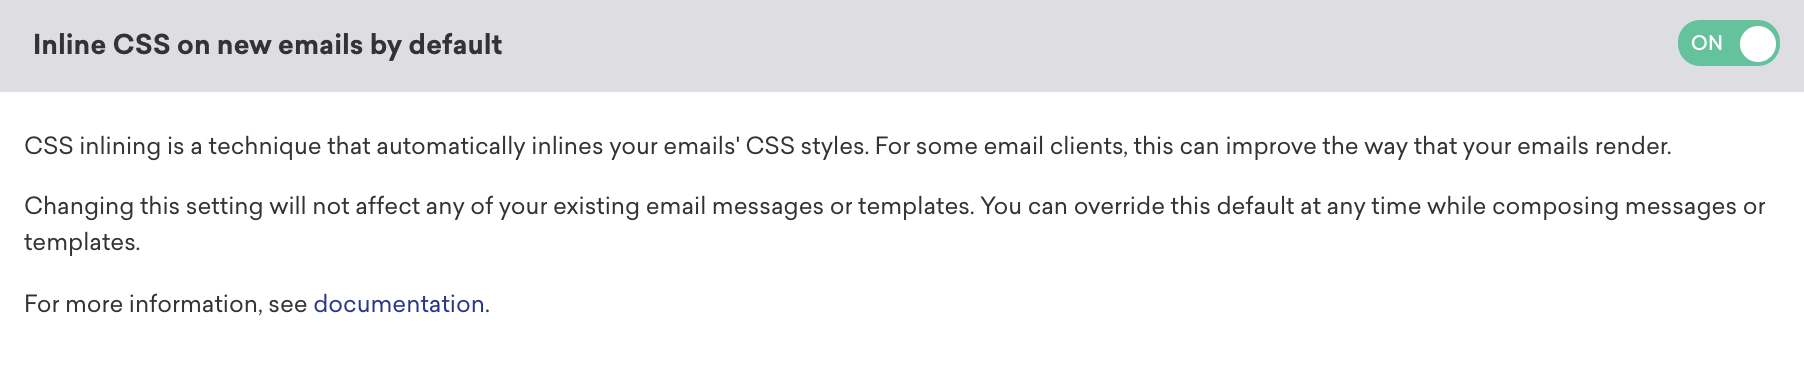 Inline CSS on new emails by default option located in email settings.